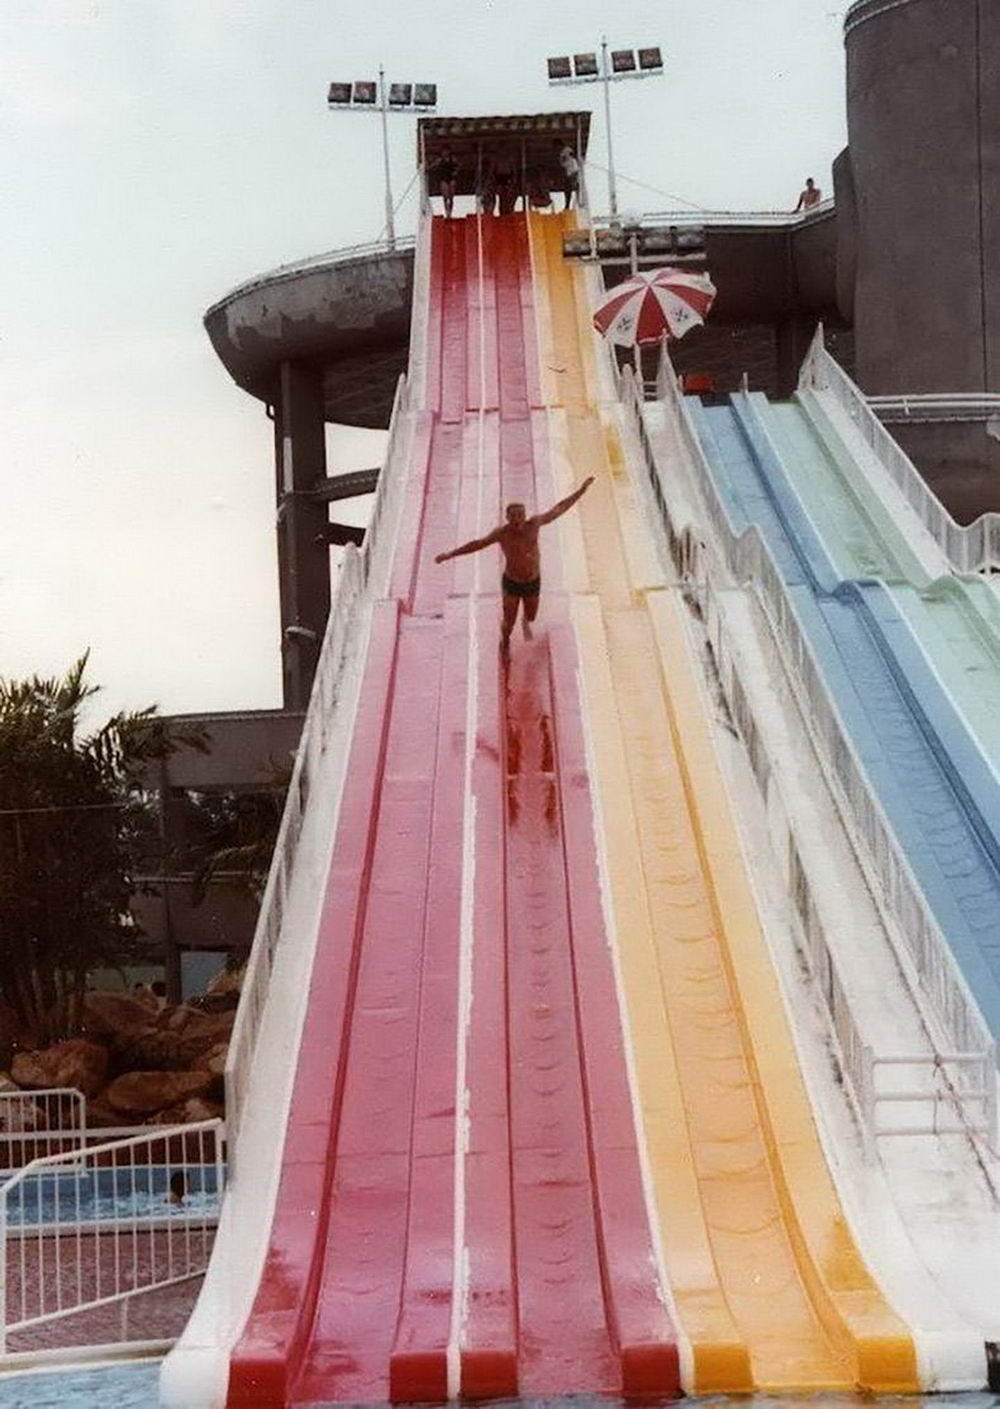 remarkable image of a man falling down a water slide